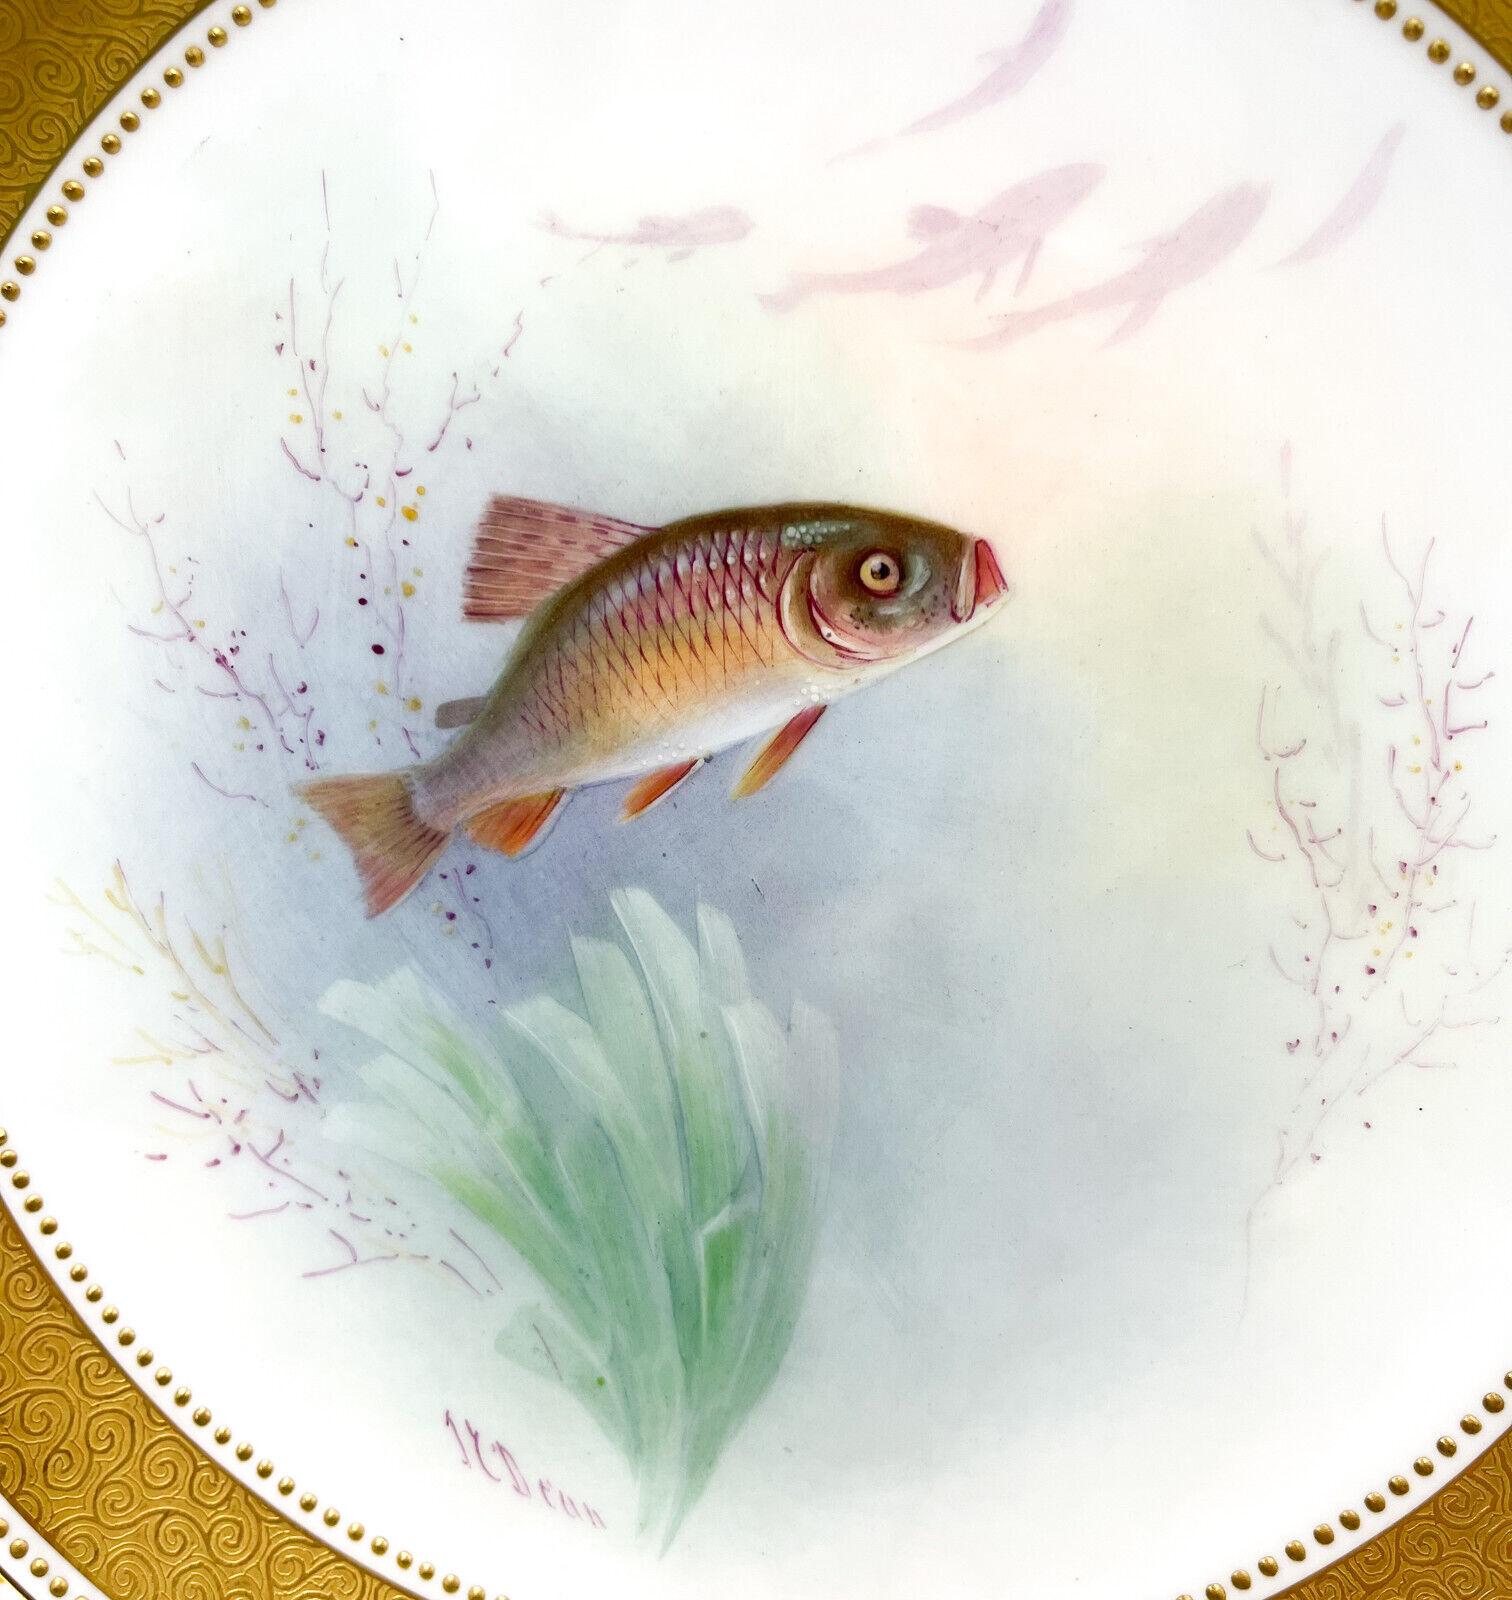 Set of 11 Minton England Porcelain Hand Painted Fish Cabinet Plates, circa 1905 In Good Condition For Sale In Gardena, CA